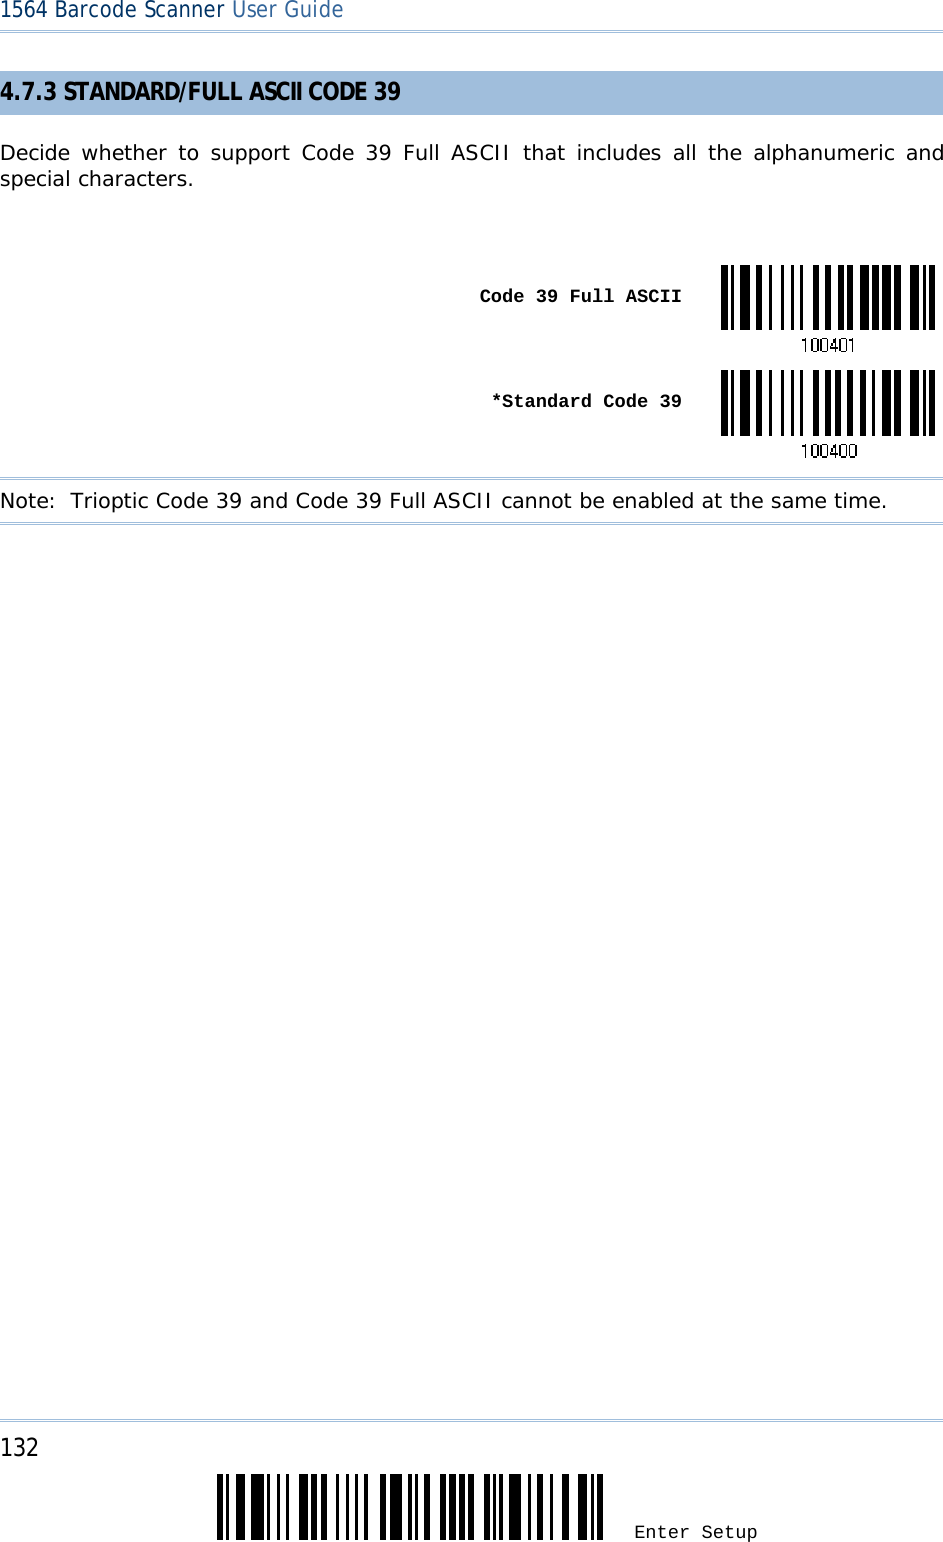 132 Enter Setup 1564 Barcode Scanner User Guide  4.7.3 STANDARD/FULL ASCII CODE 39 Decide whether to support Code 39 Full ASCII that includes all the alphanumeric and special characters.   Code 39 Full ASCII *Standard Code 39Note:  Trioptic Code 39 and Code 39 Full ASCII cannot be enabled at the same time.                 